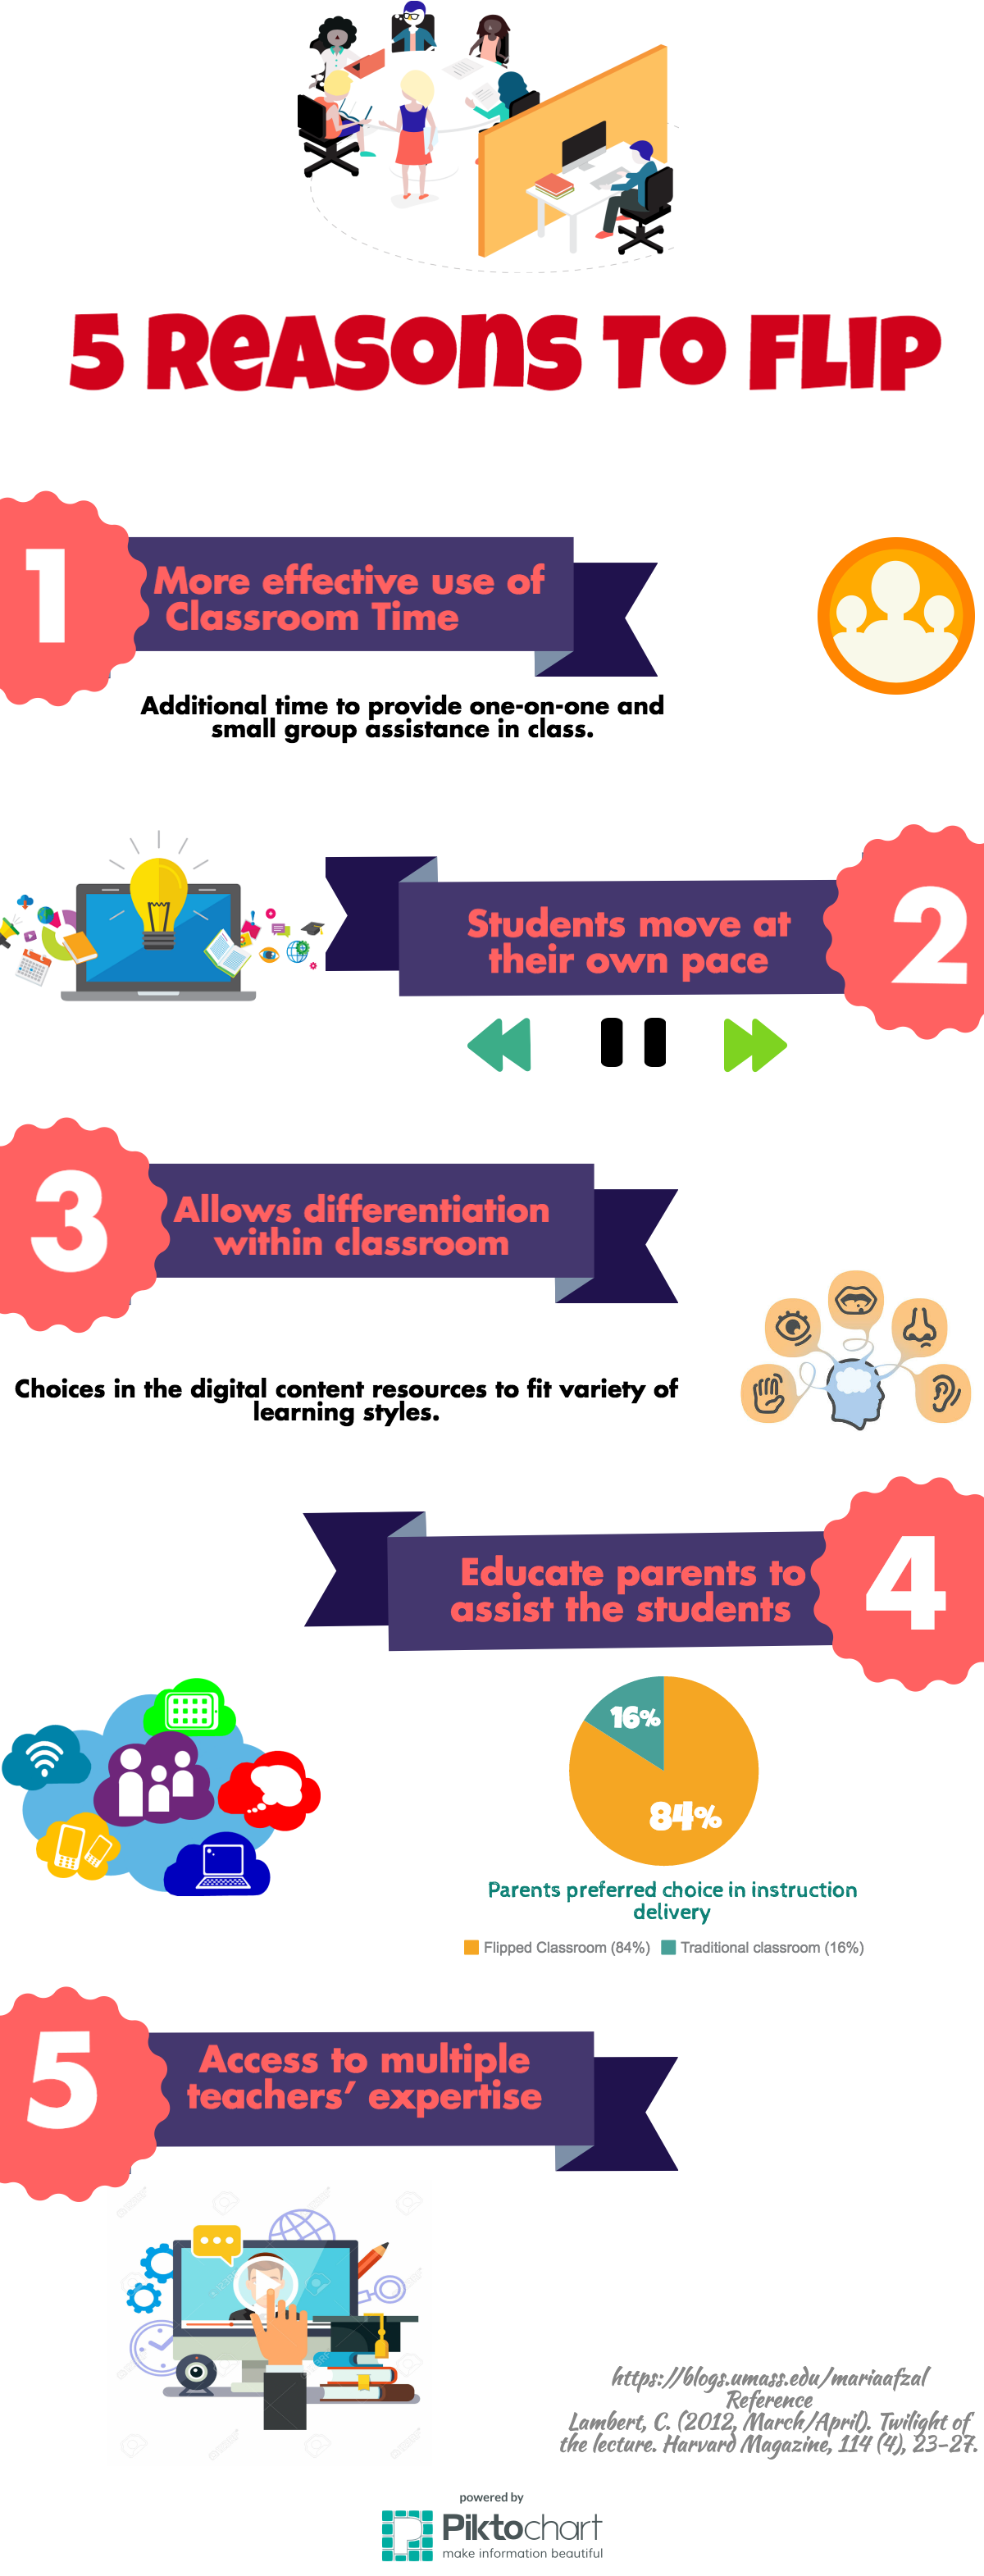 An Infographic consisiting of 5 purple ribbons lying horizontally on white background saying five reasons to flip. 1st: Most effective use of classoom time 2nd: Student move at their own pace 3rd: Allows differentiation within a classroom 4th:Educate parents to assist the students 5th: Access to multiple teachers' expertise.